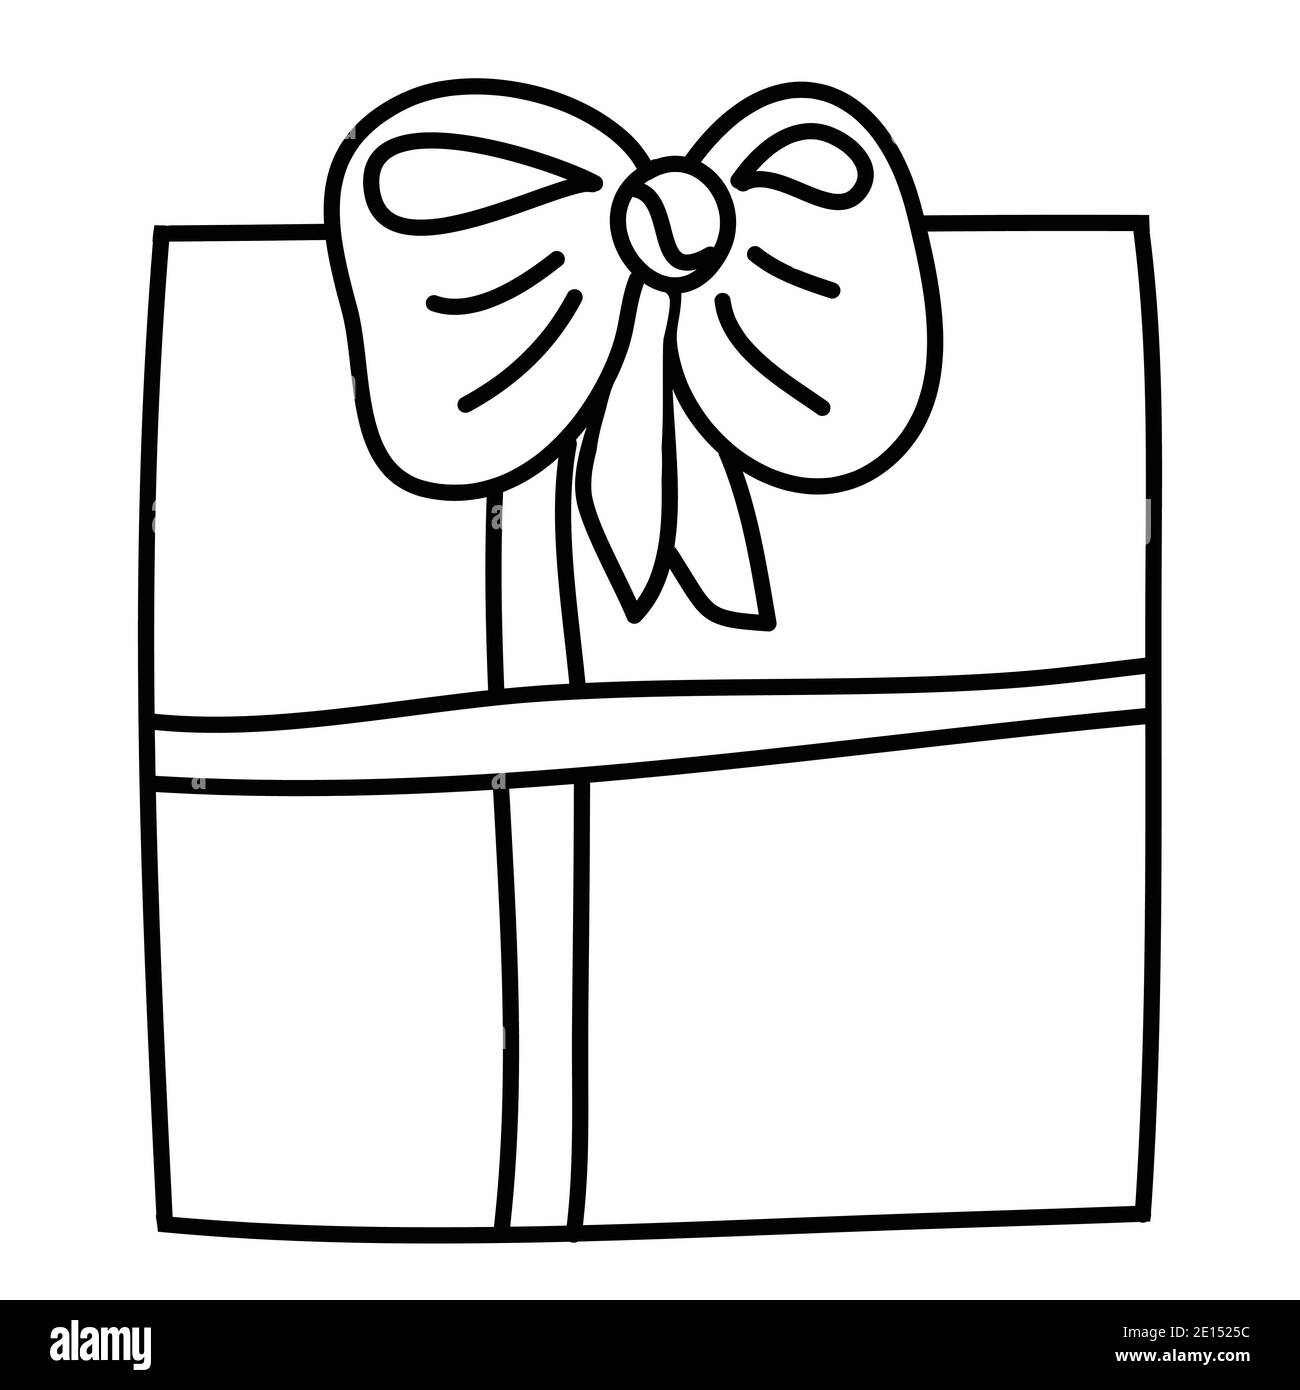 https://c8.alamy.com/comp/2E1525C/square-gift-box-with-ribbon-and-beautiful-bow-doodle-style-hand-drawn-vector-illustration-2E1525C.jpg